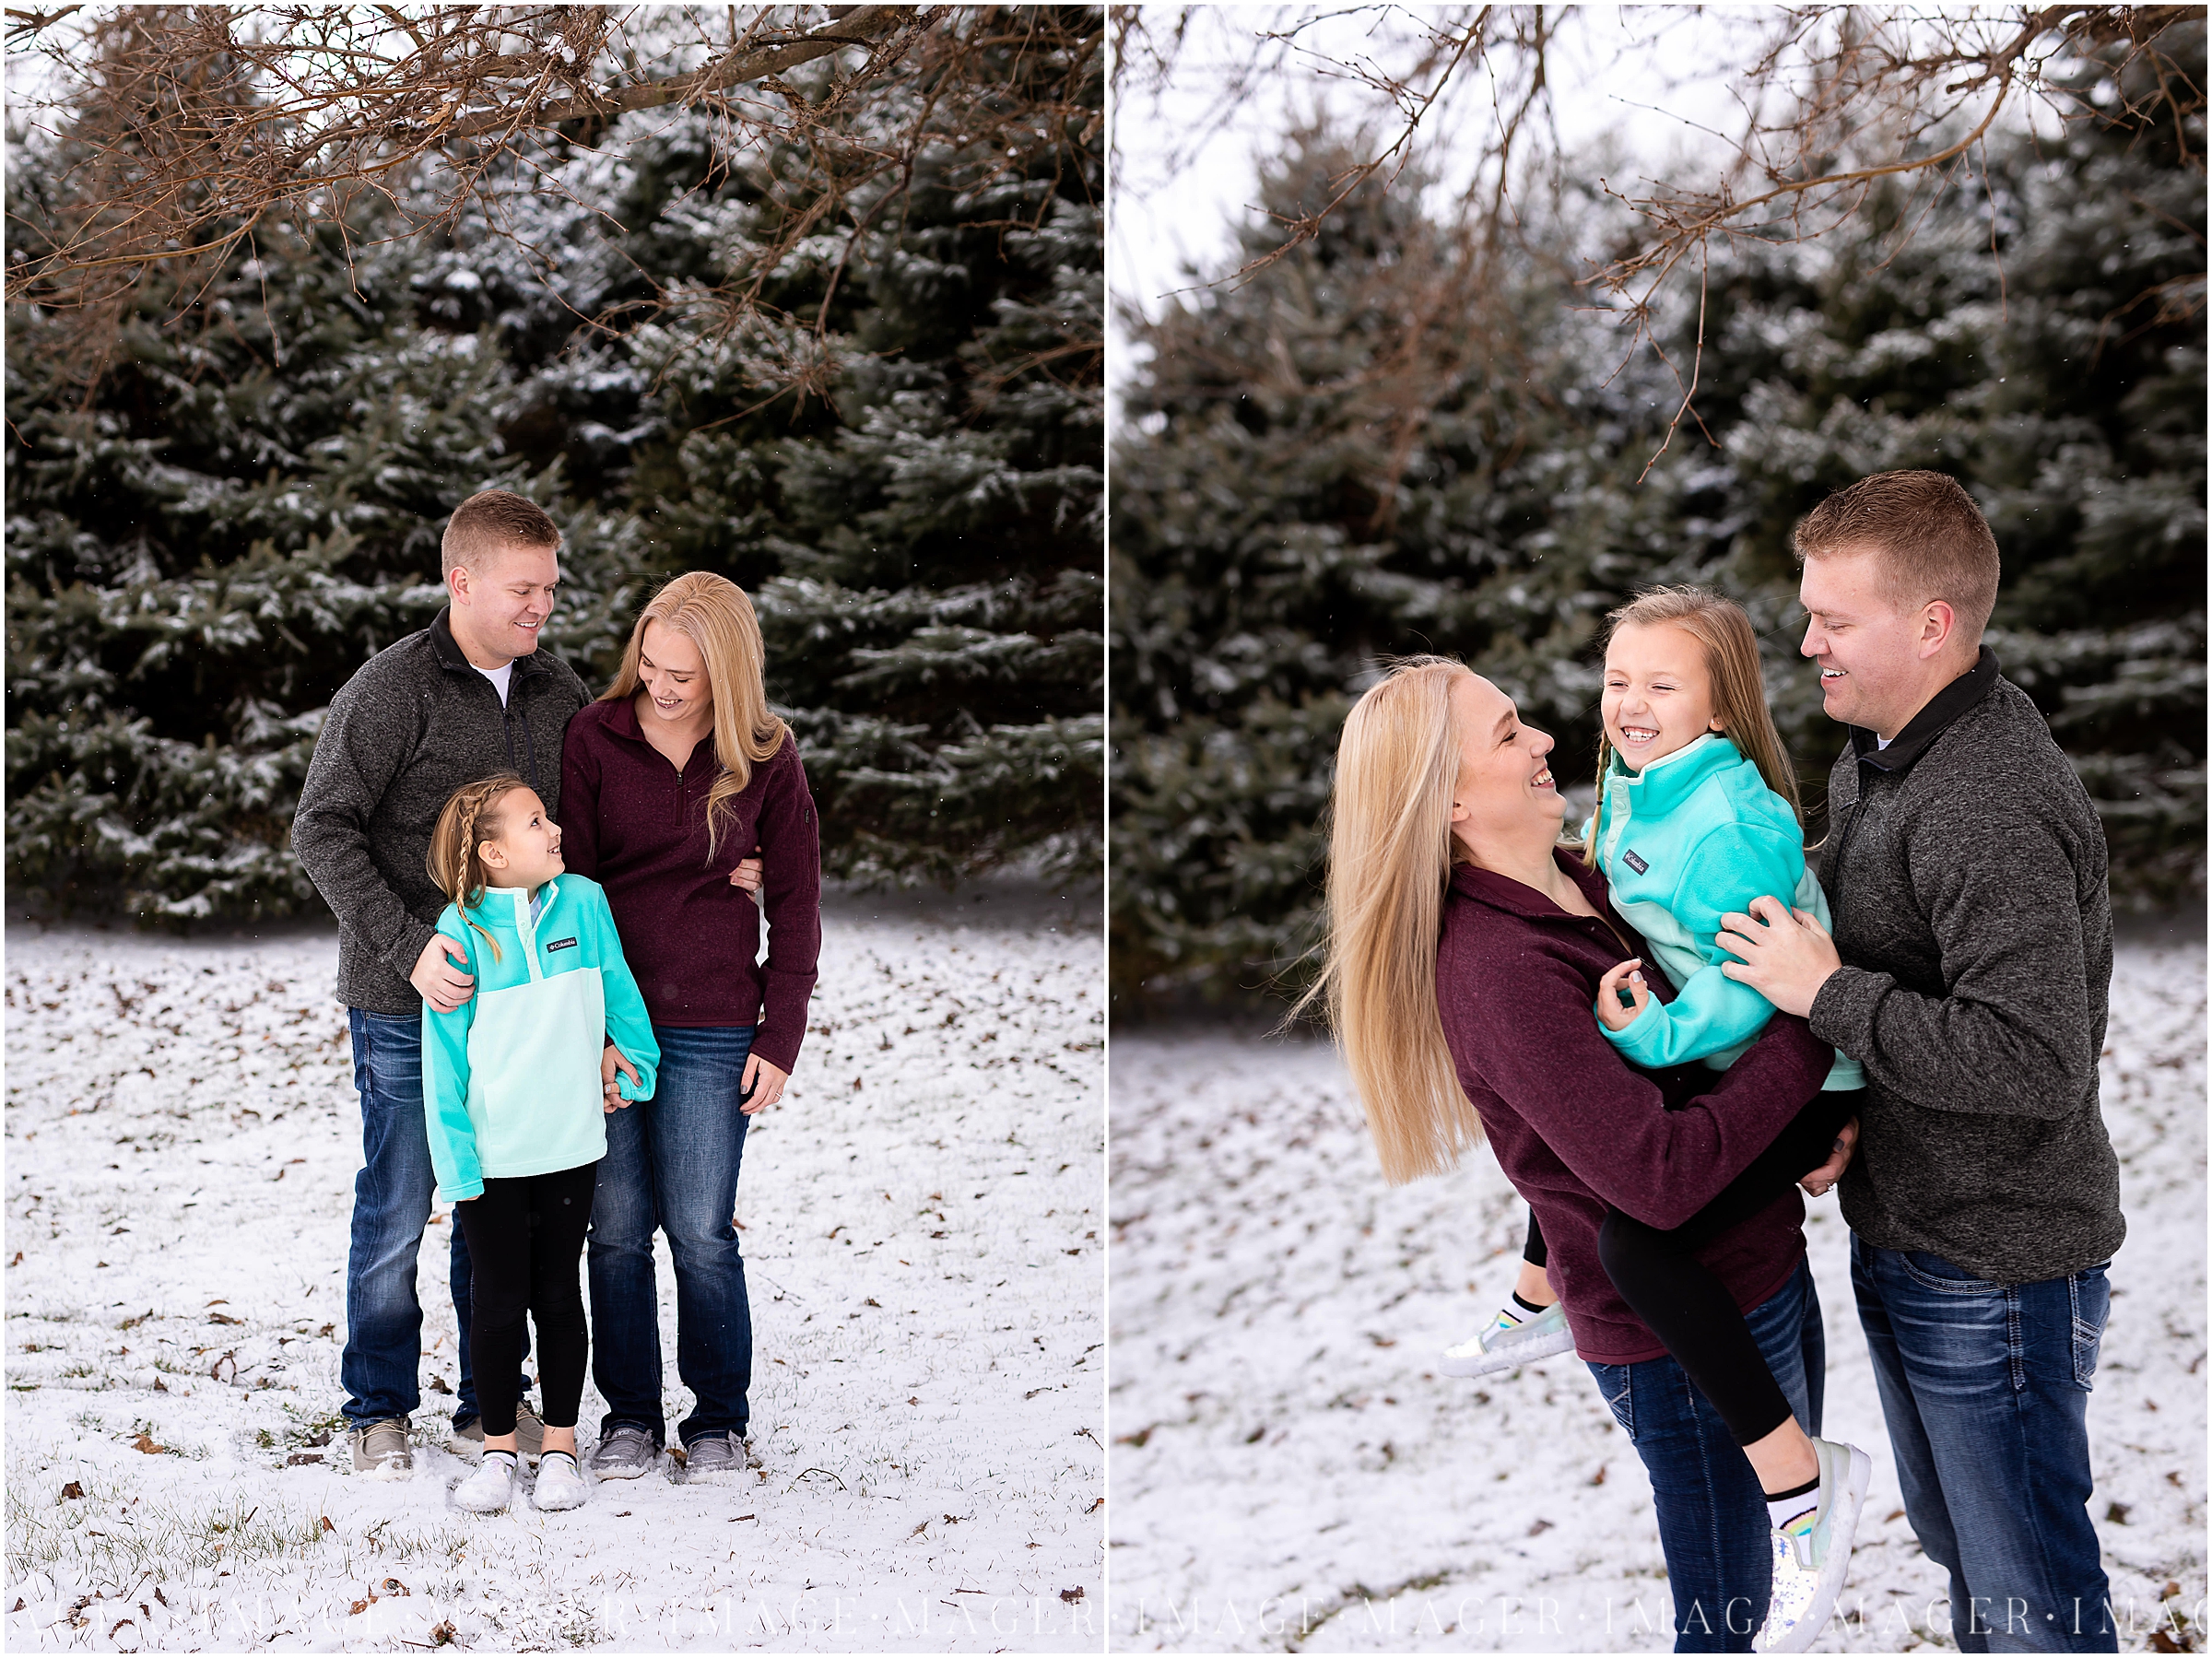 Ten Mile Grove winter engagement session, snow capped evergreen trees